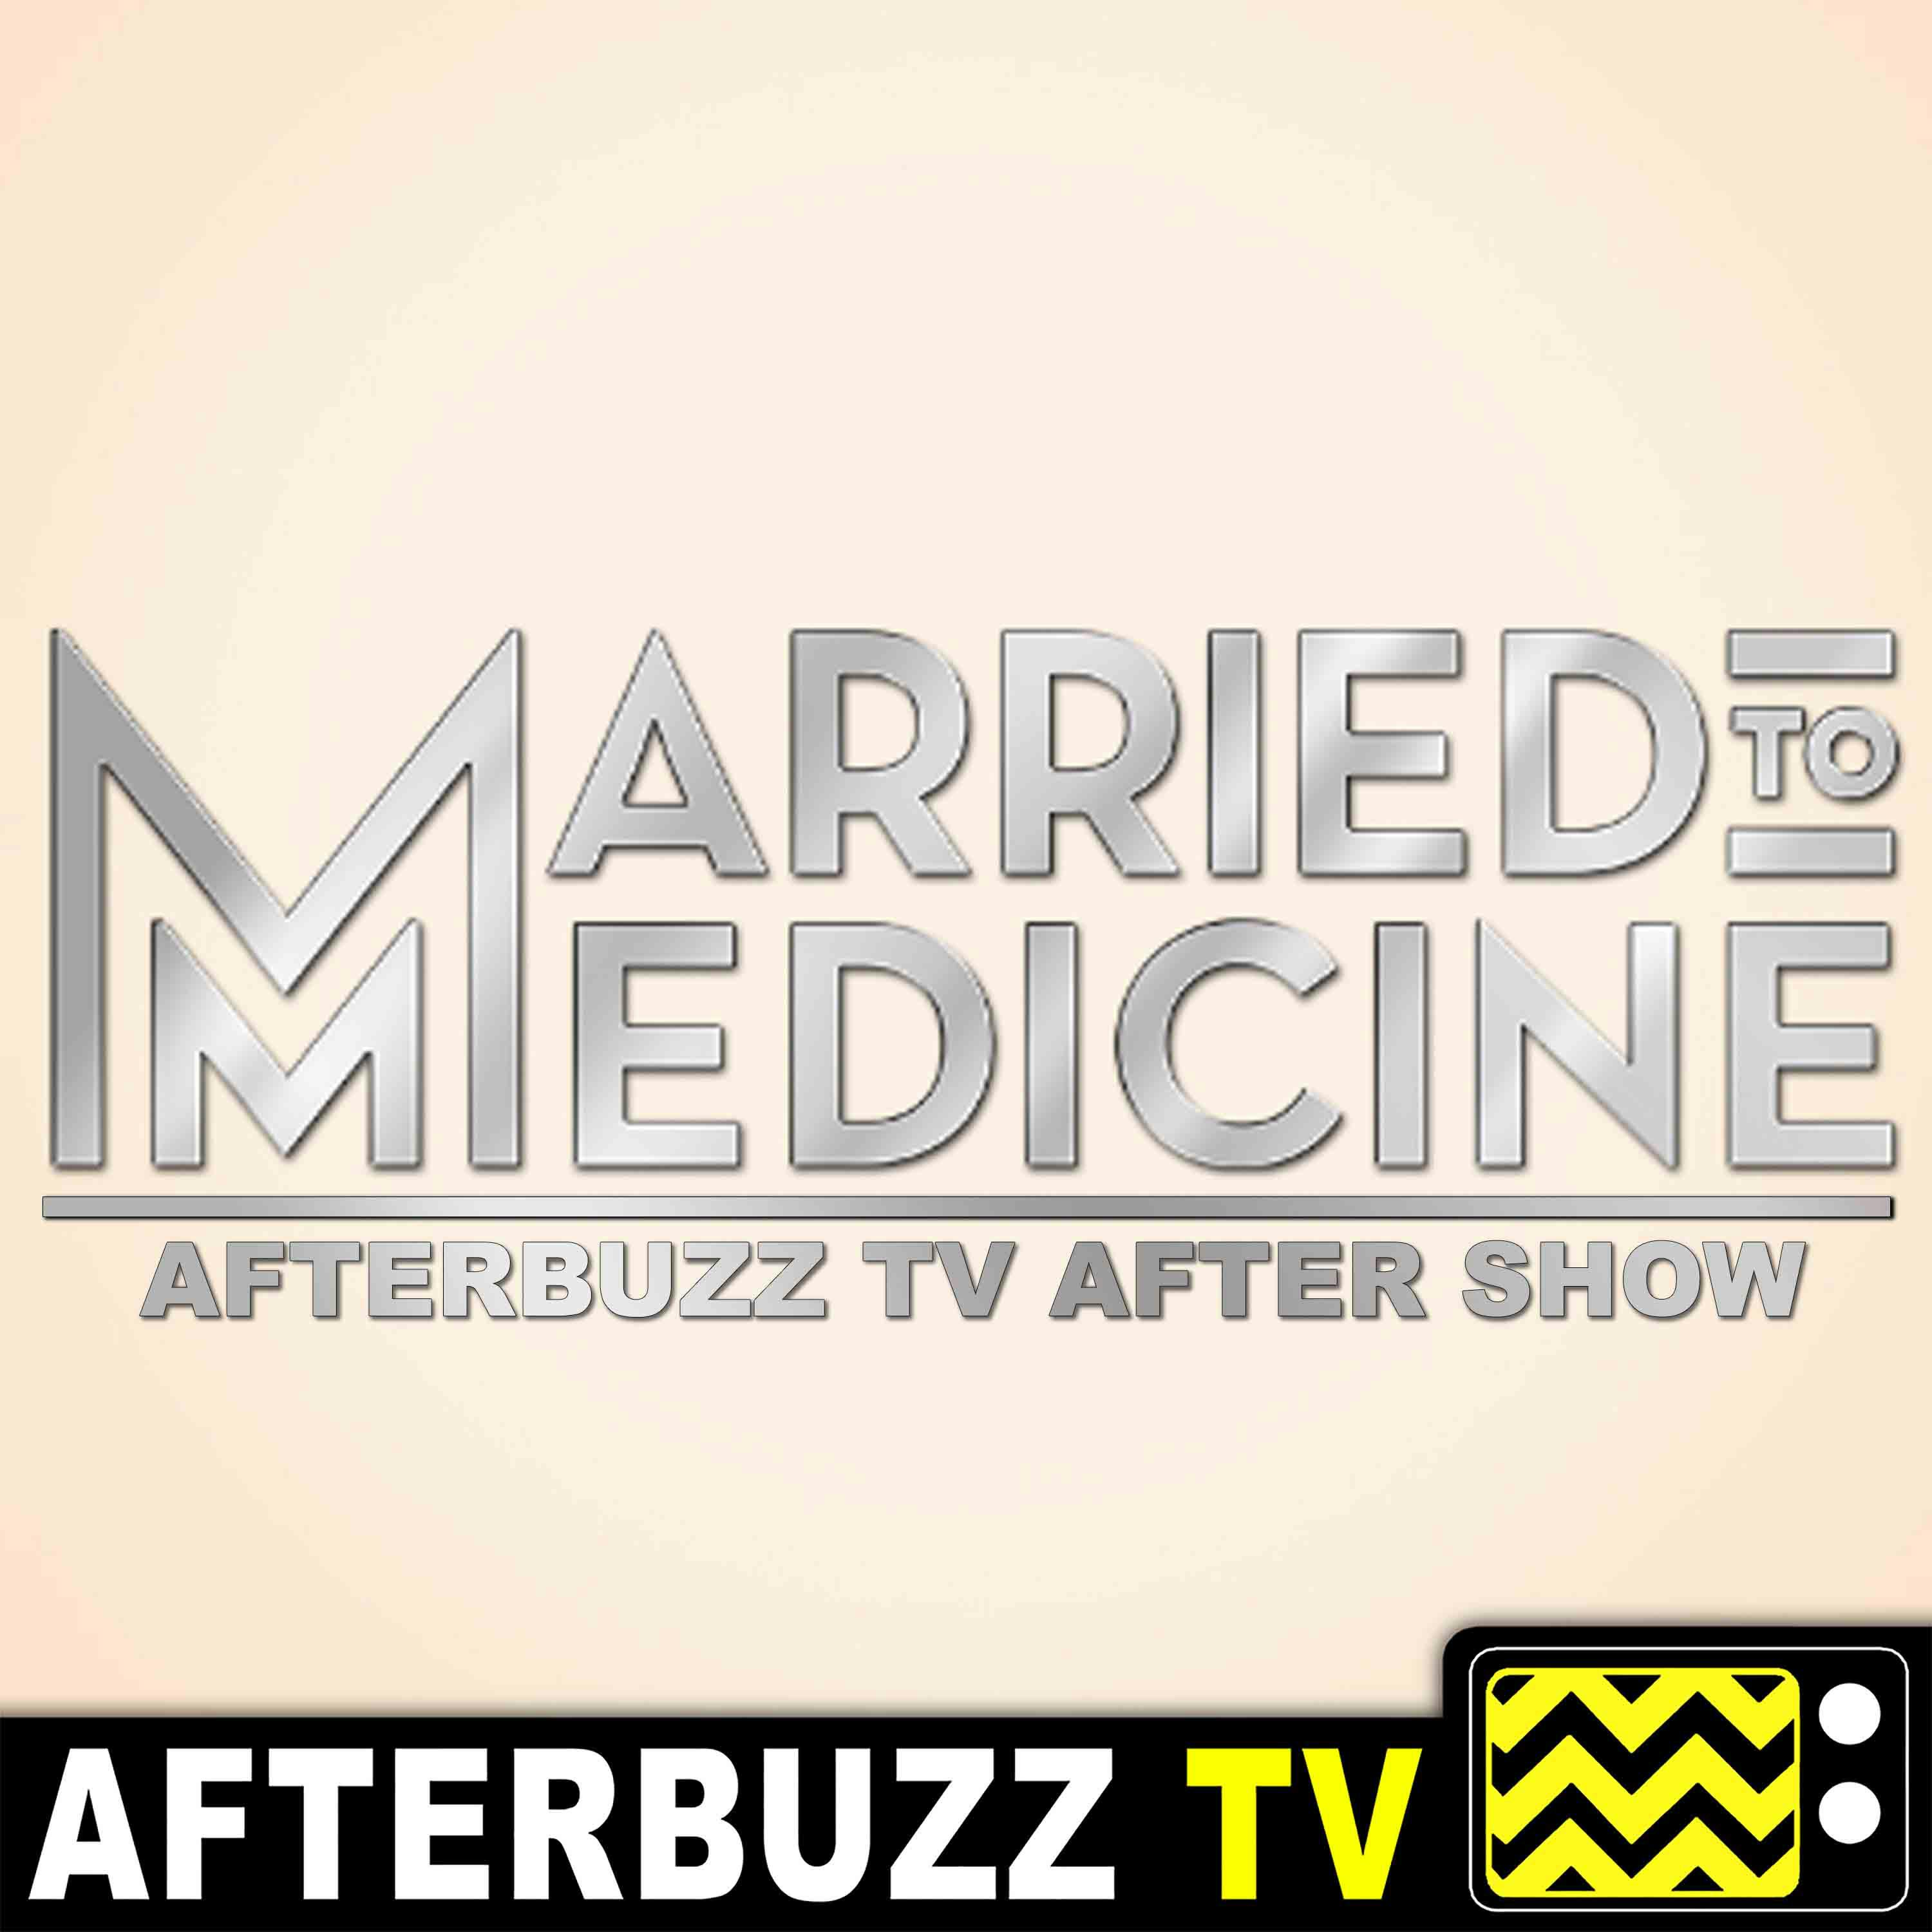 "Food For Thought" Season 7 Episode 11 'Married to Medicine' Review